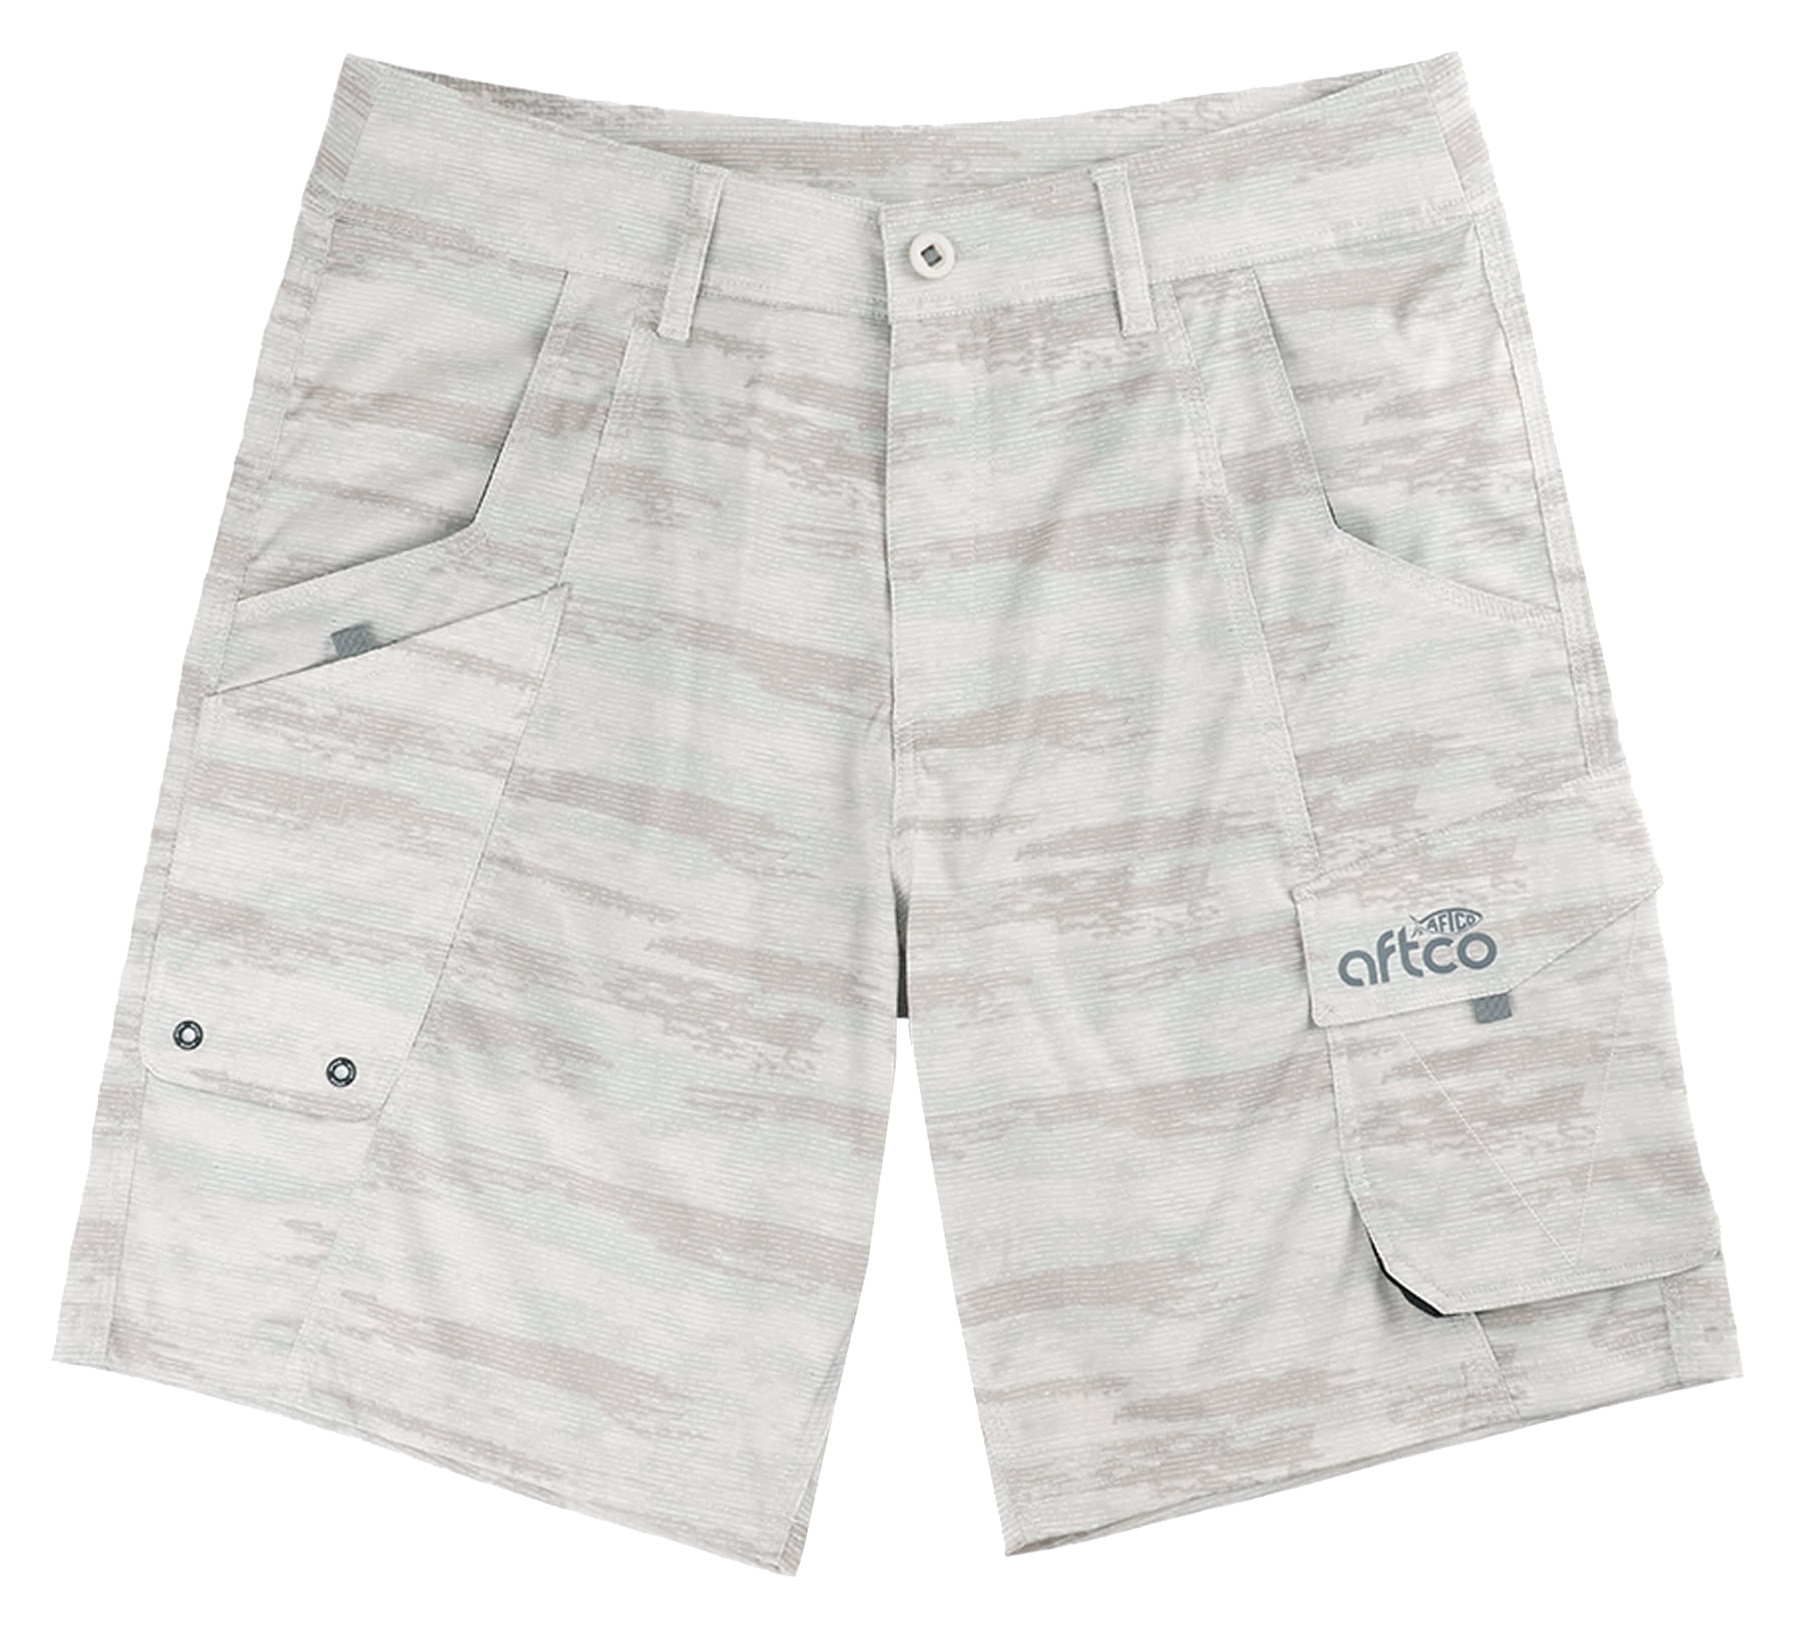 AFTCO Tactical Fishing Shorts for Men